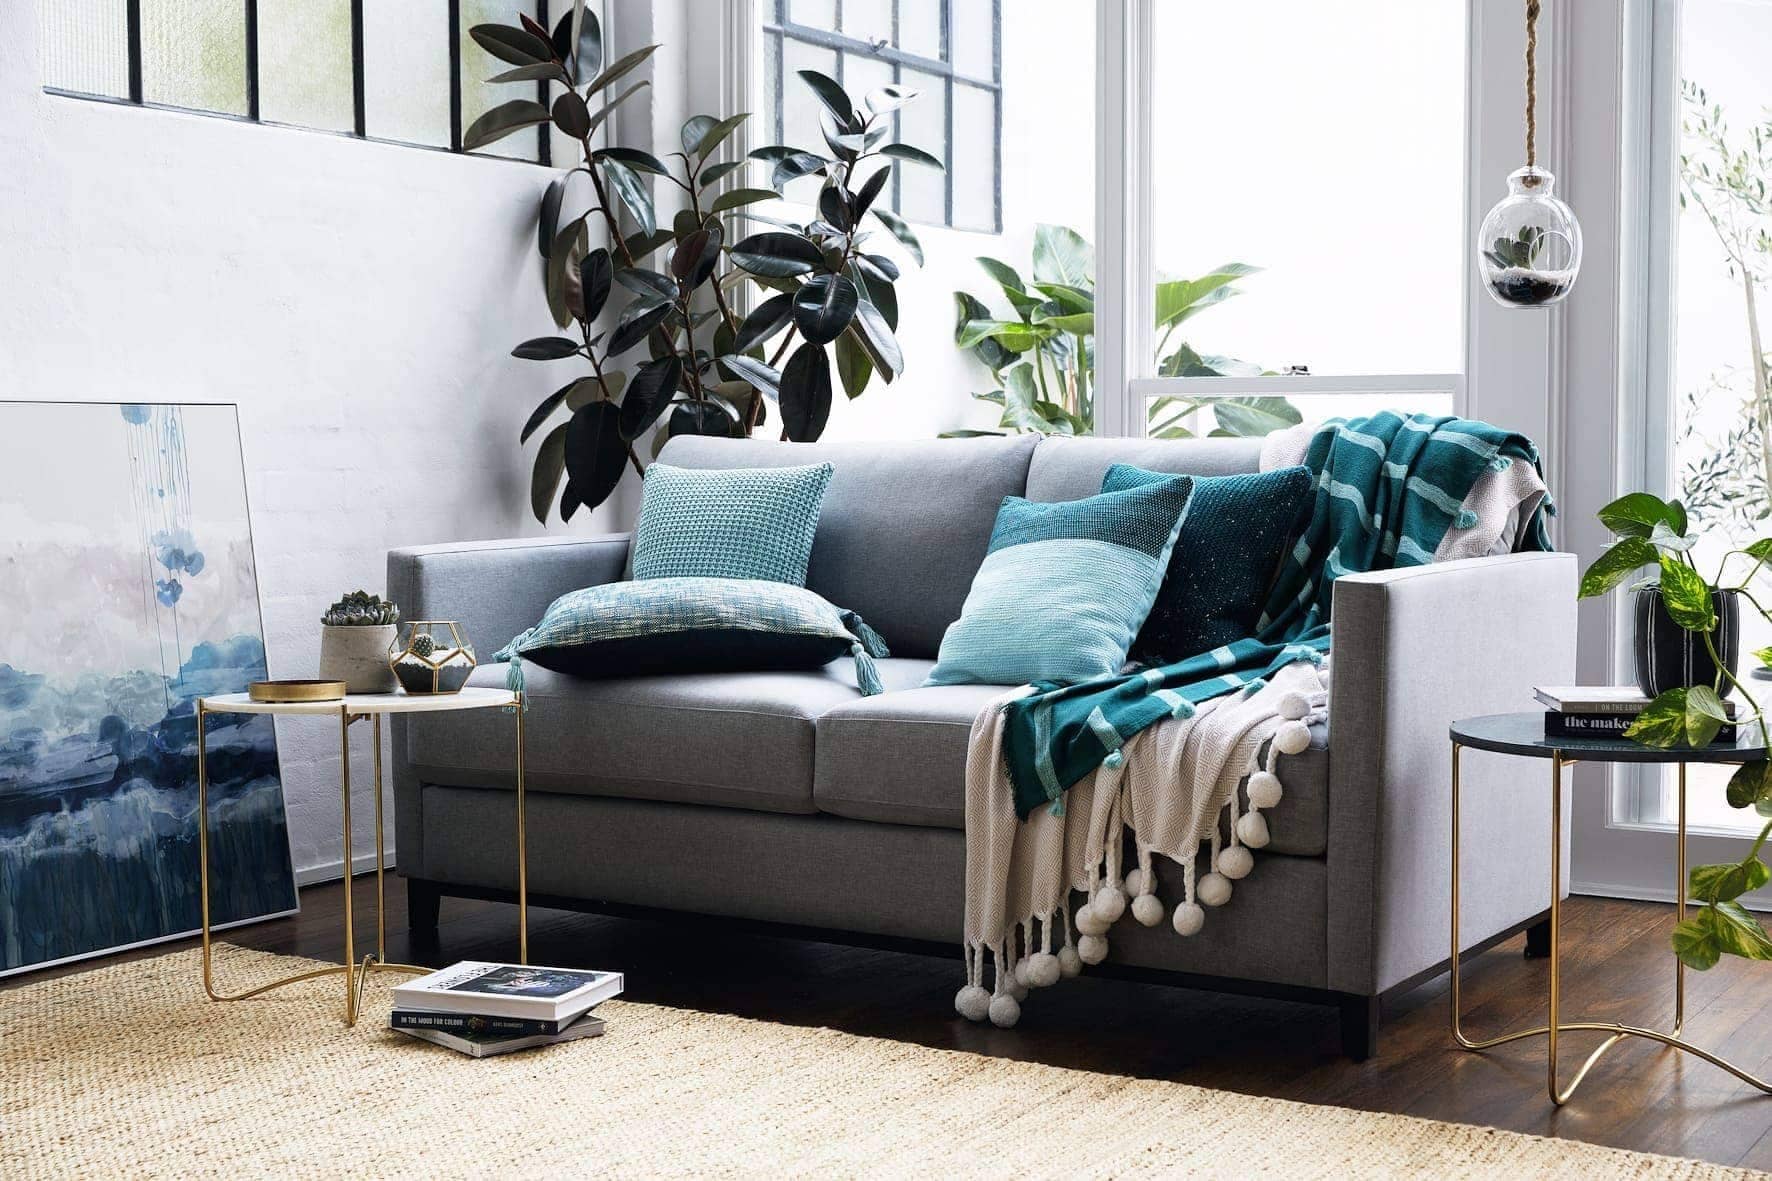 Choosing the Right Size And Configuration for a Sectional Sofa Bed